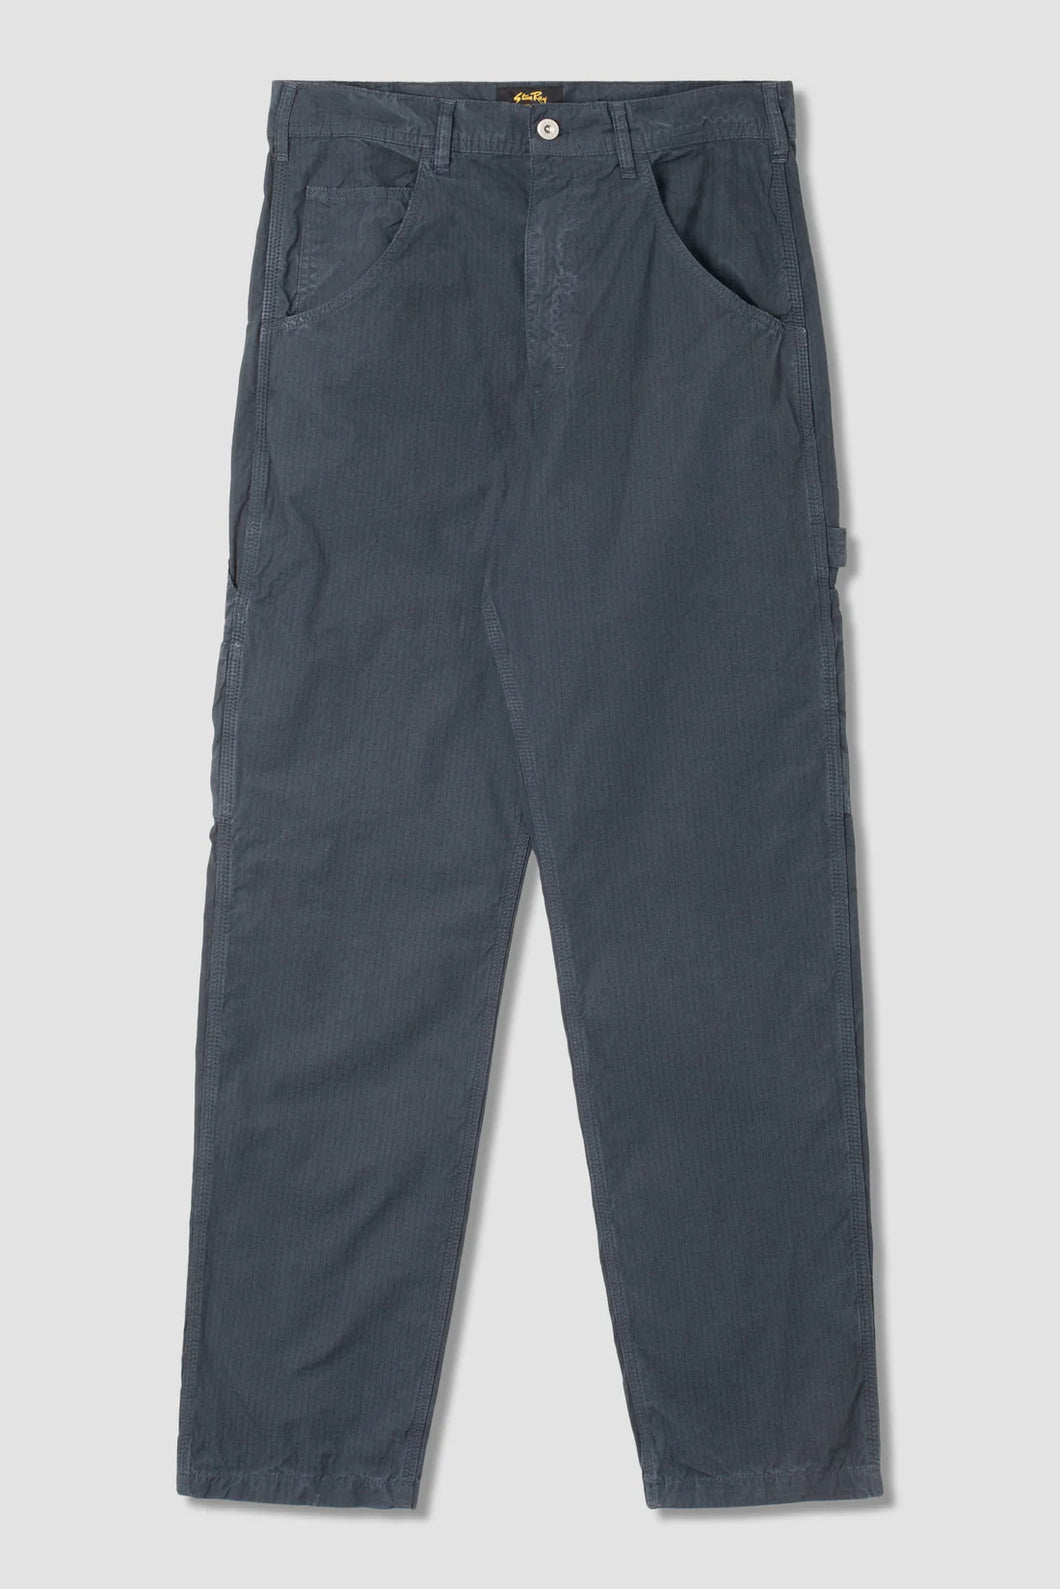 80s PAINTER PANT NAVY RIPSTOP 